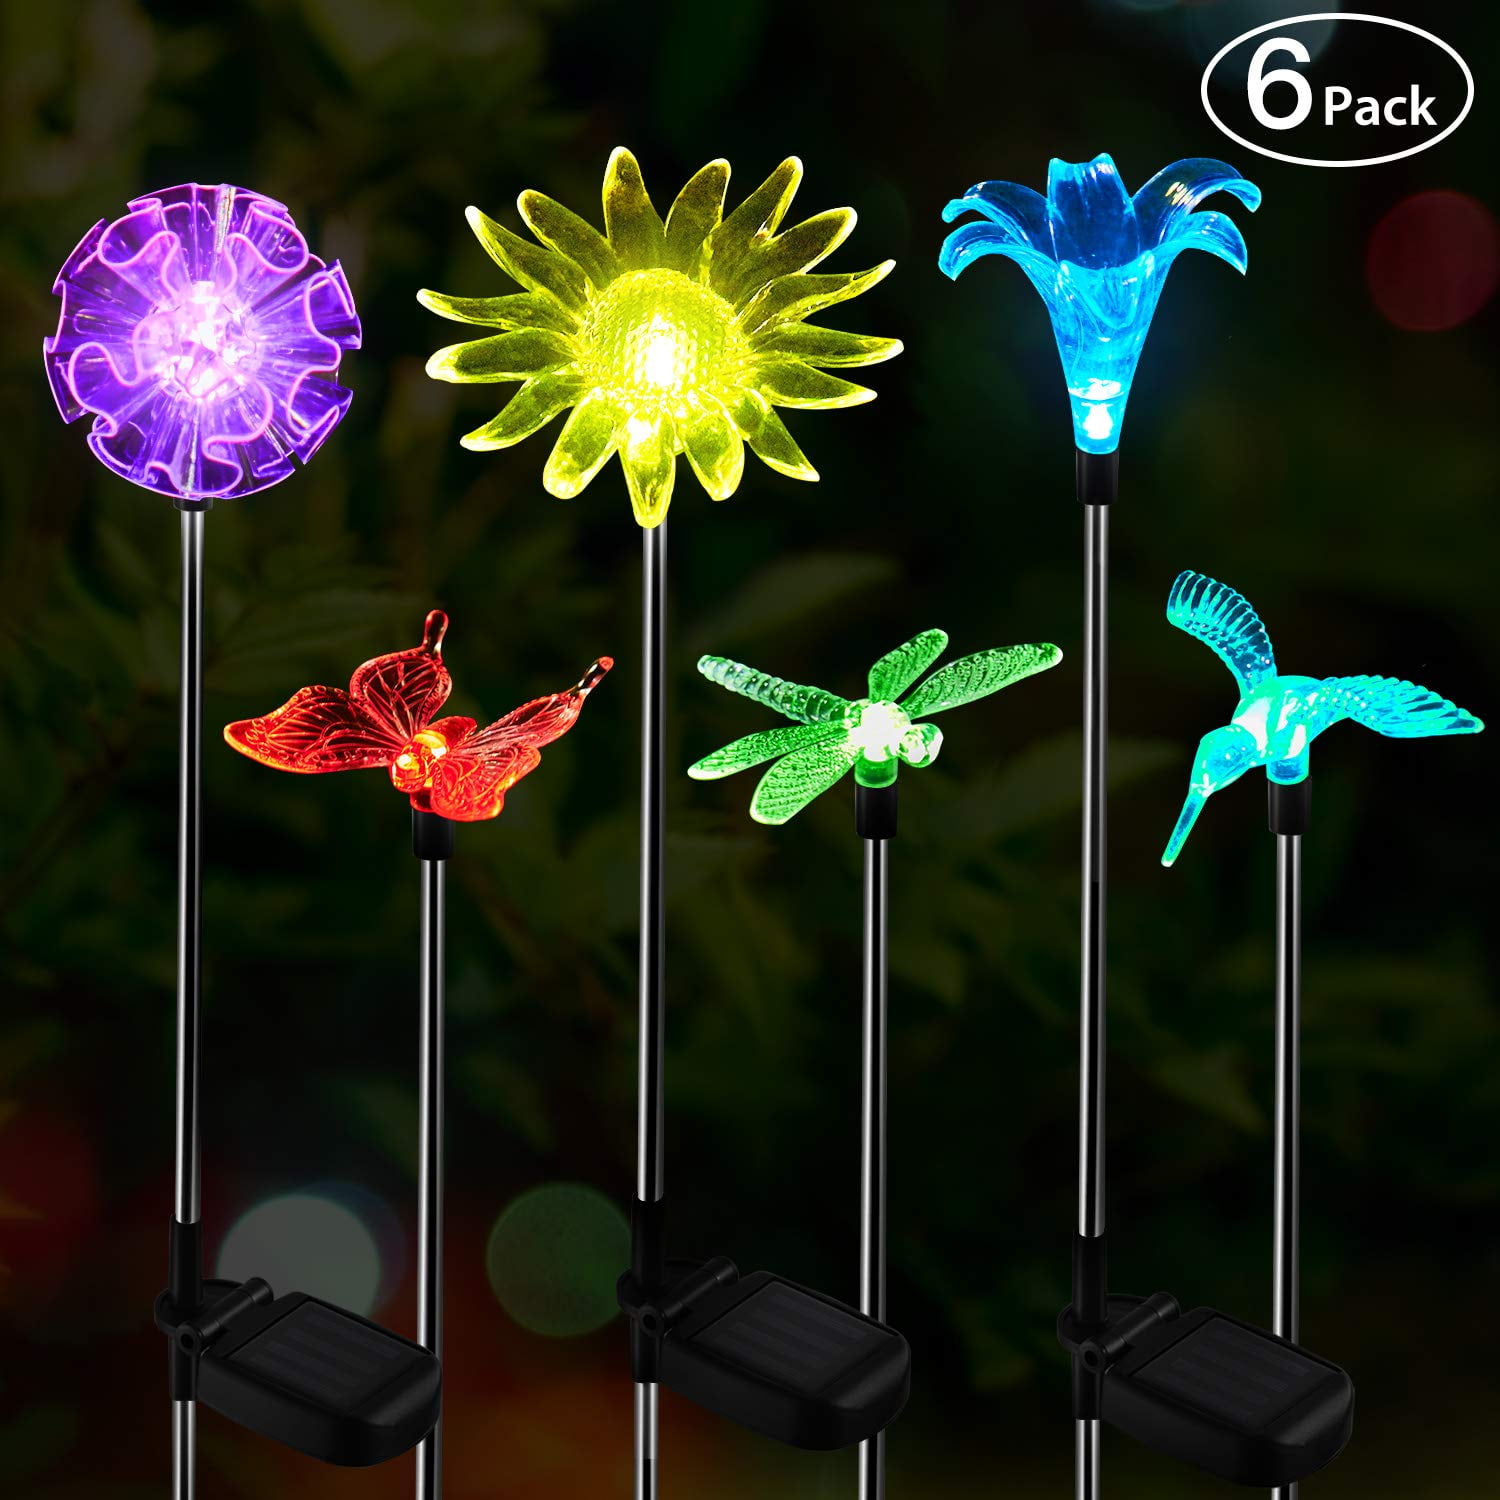 Solar Powered LED Flower Fairy Lights Stake Outdoor Garden Path Lawn Decor Lamp